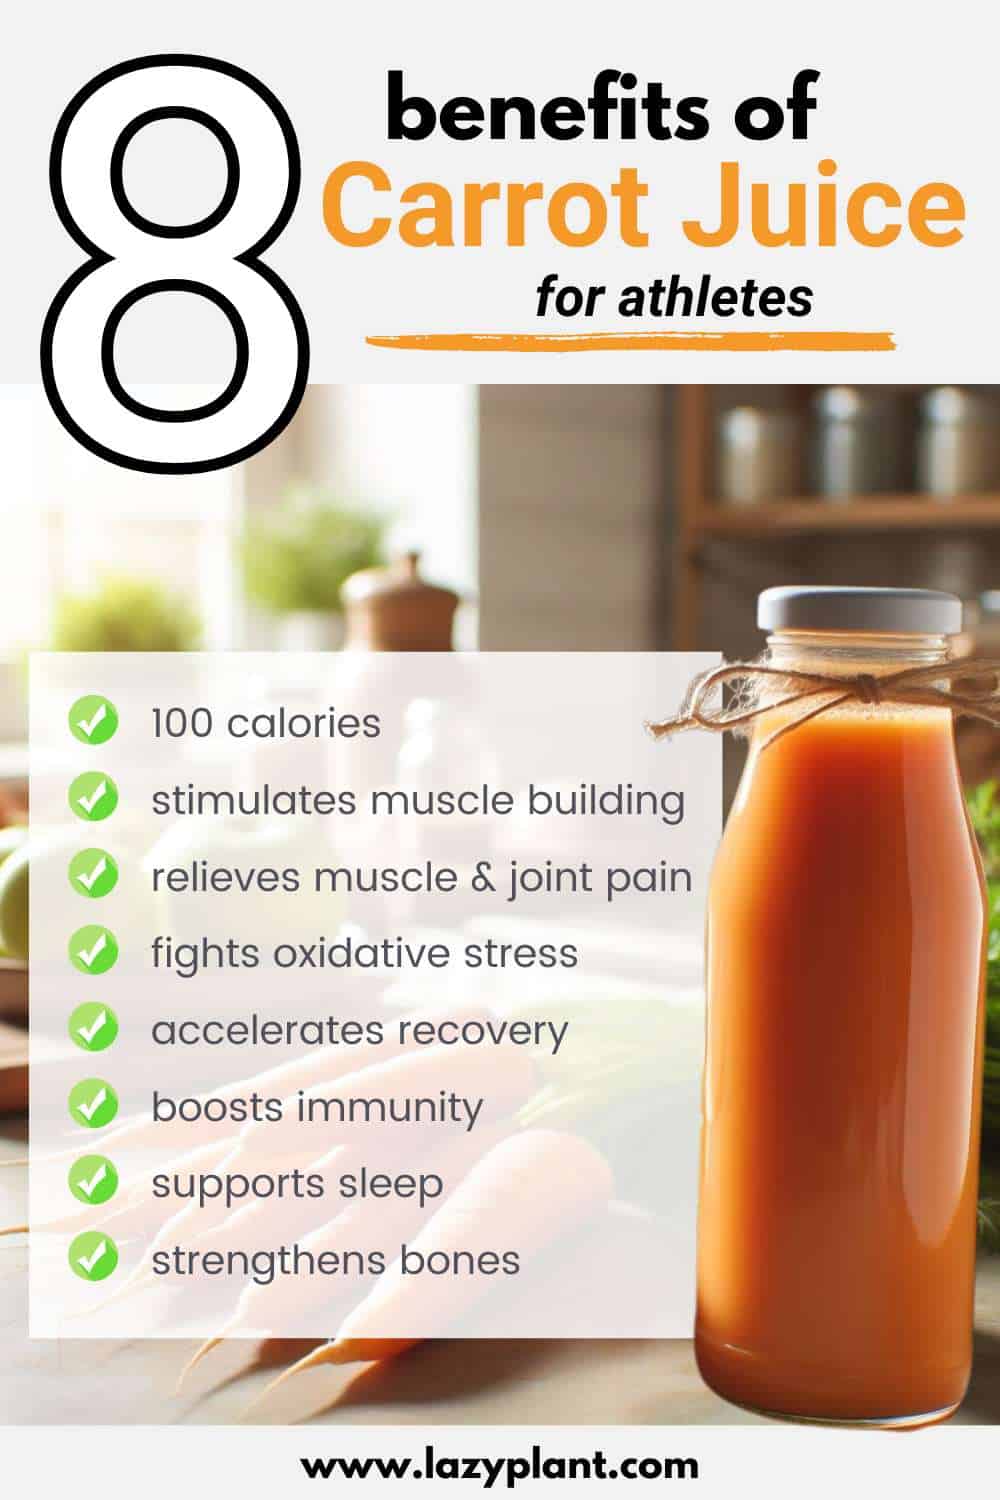 8 Reasons why Athletes should Drink Carrot Juice after Exercise